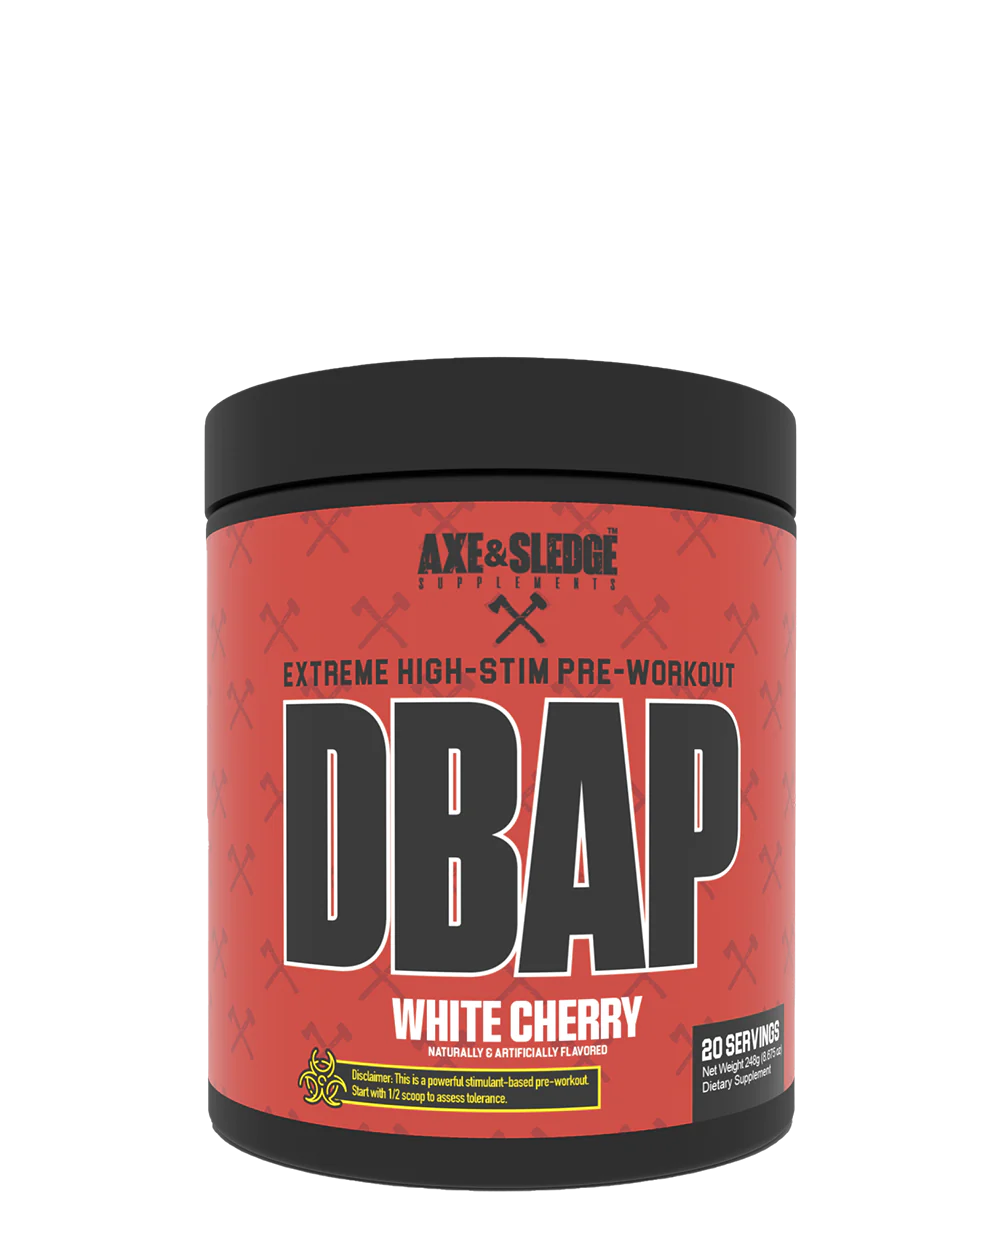 AXE AND SLEDGE DBAP HIGH STIM PRE-WORKOUT